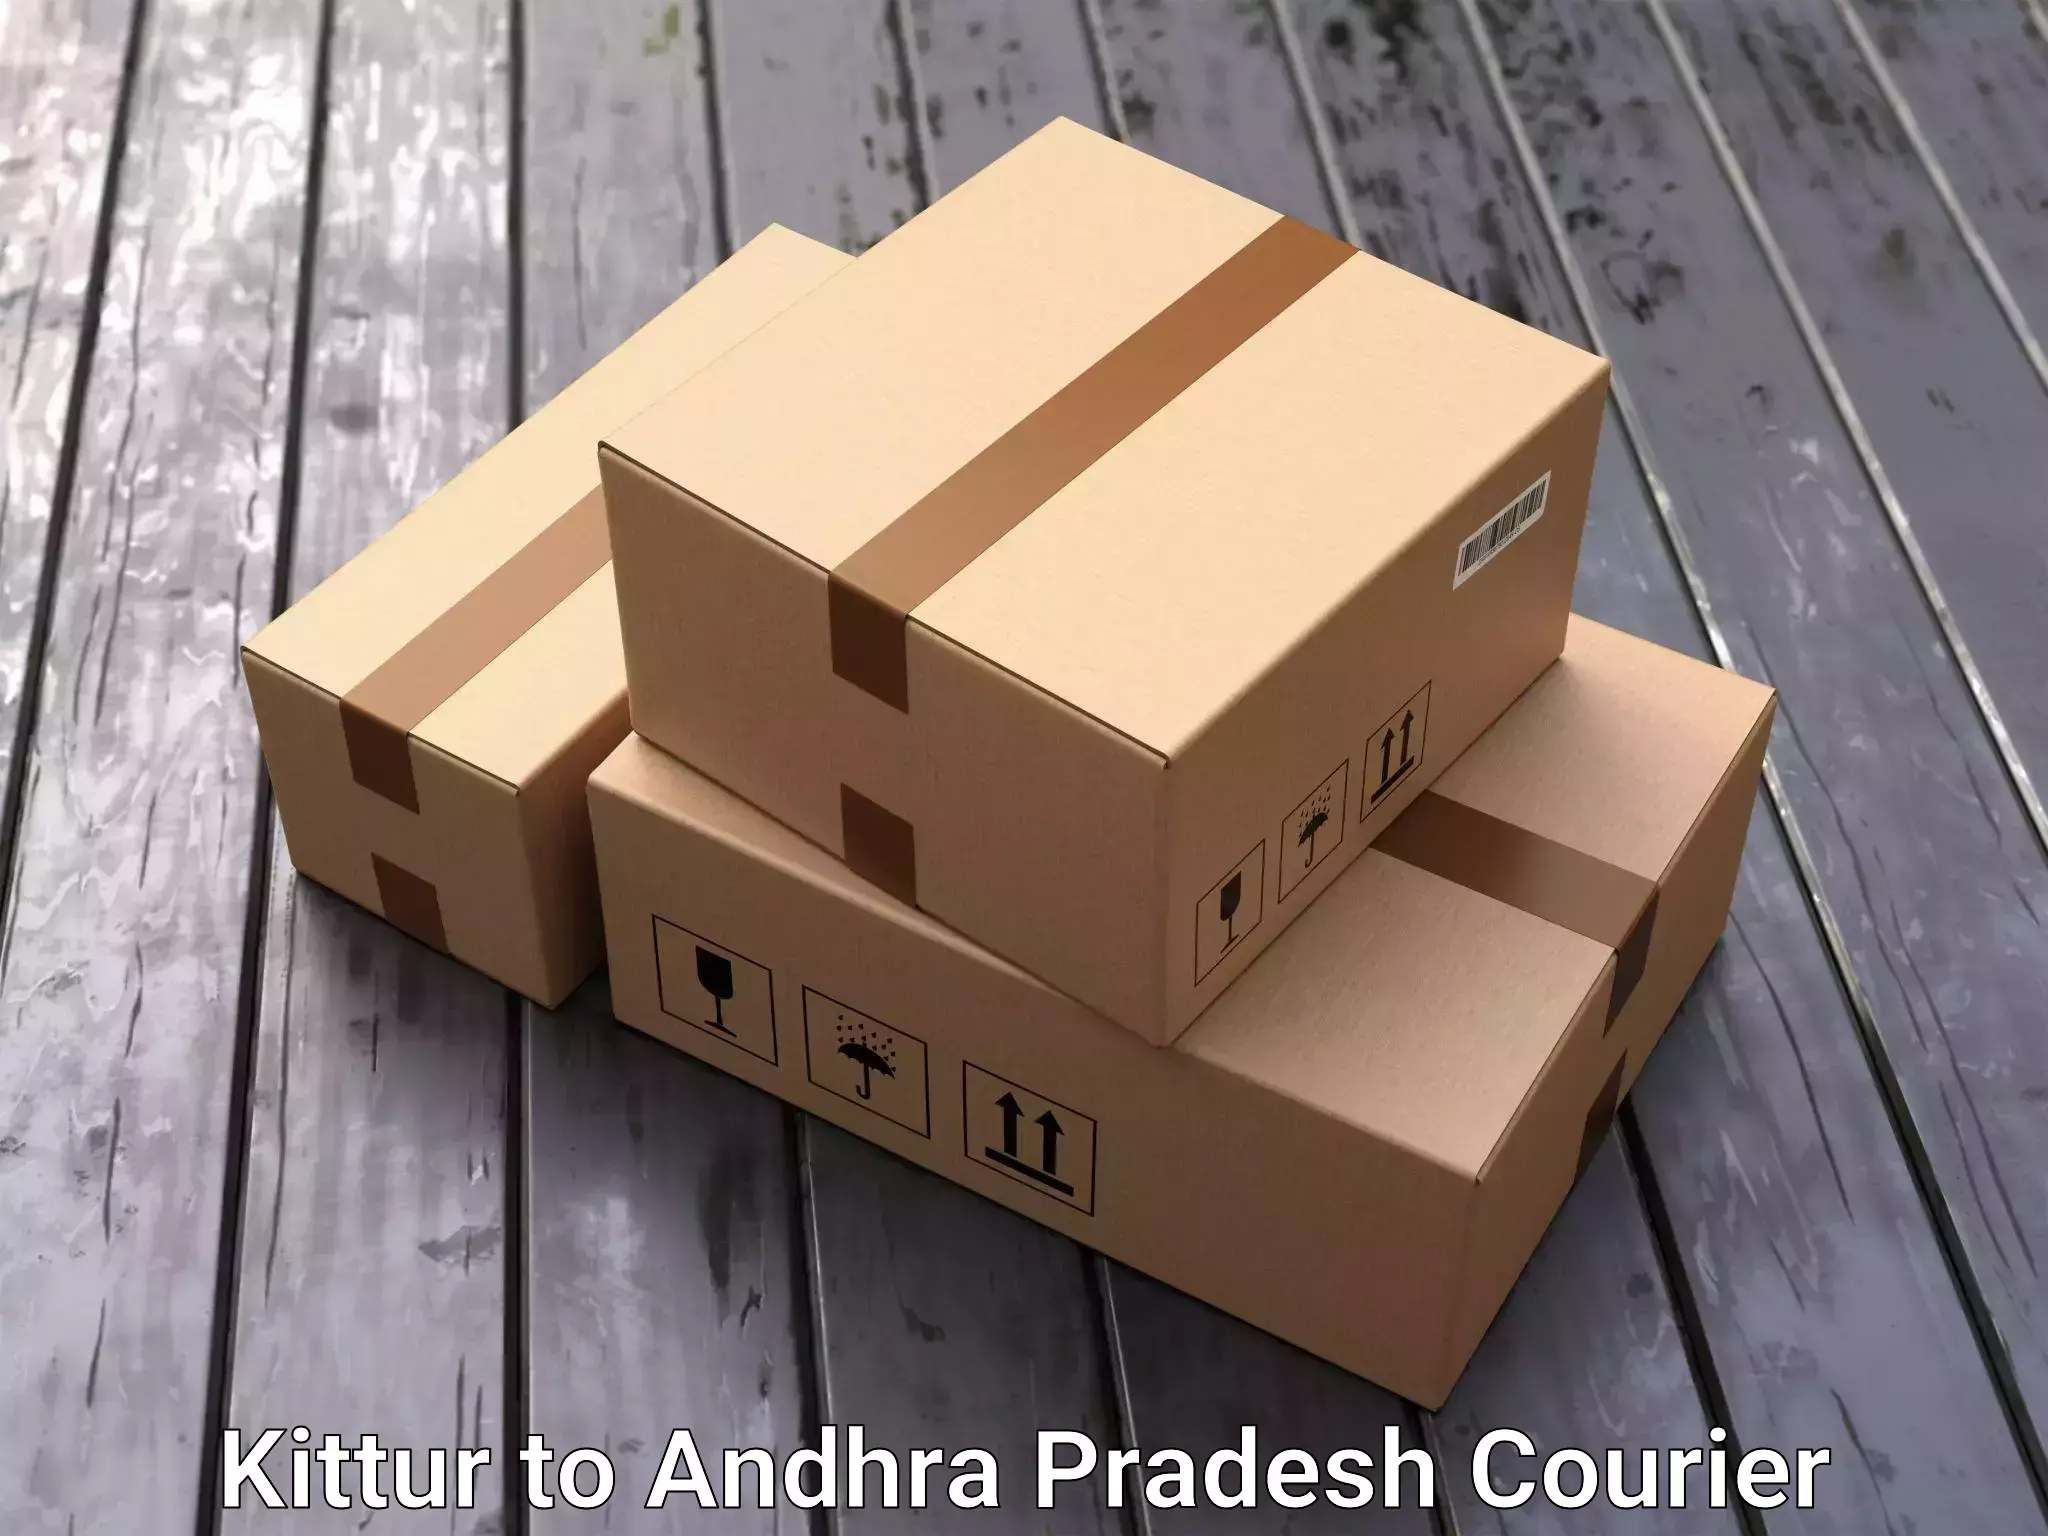 Furniture moving plans in Kittur to Madanapalle